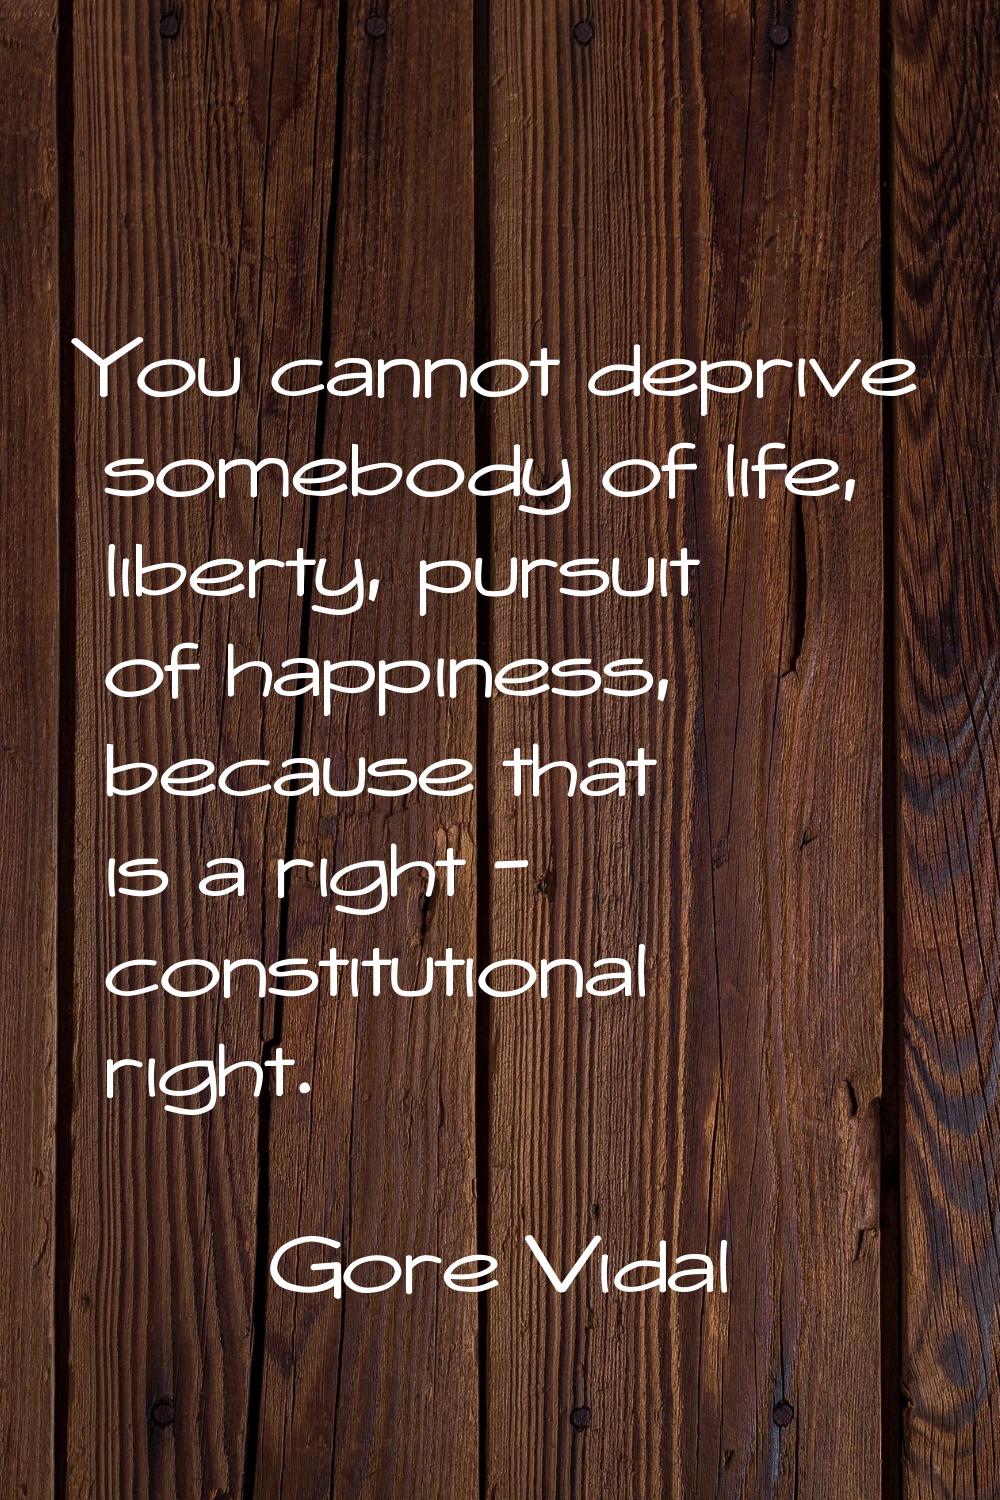 You cannot deprive somebody of life, liberty, pursuit of happiness, because that is a right - const